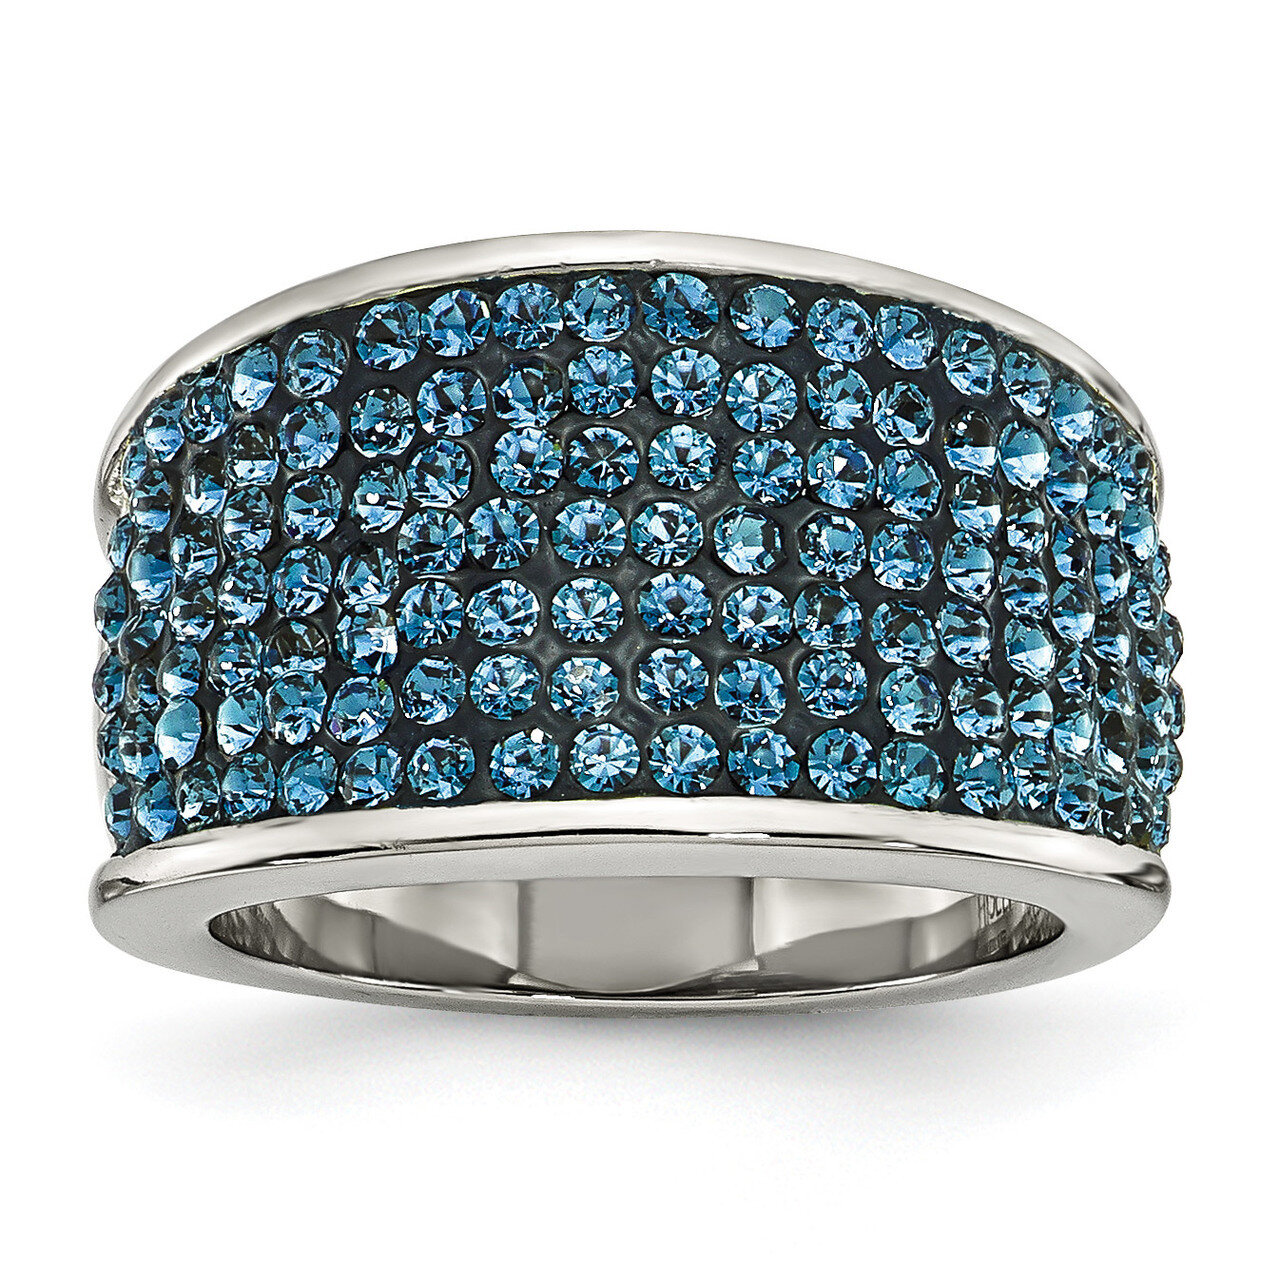 Blue Crystal Polished Ring Stainless Steel SR237-7